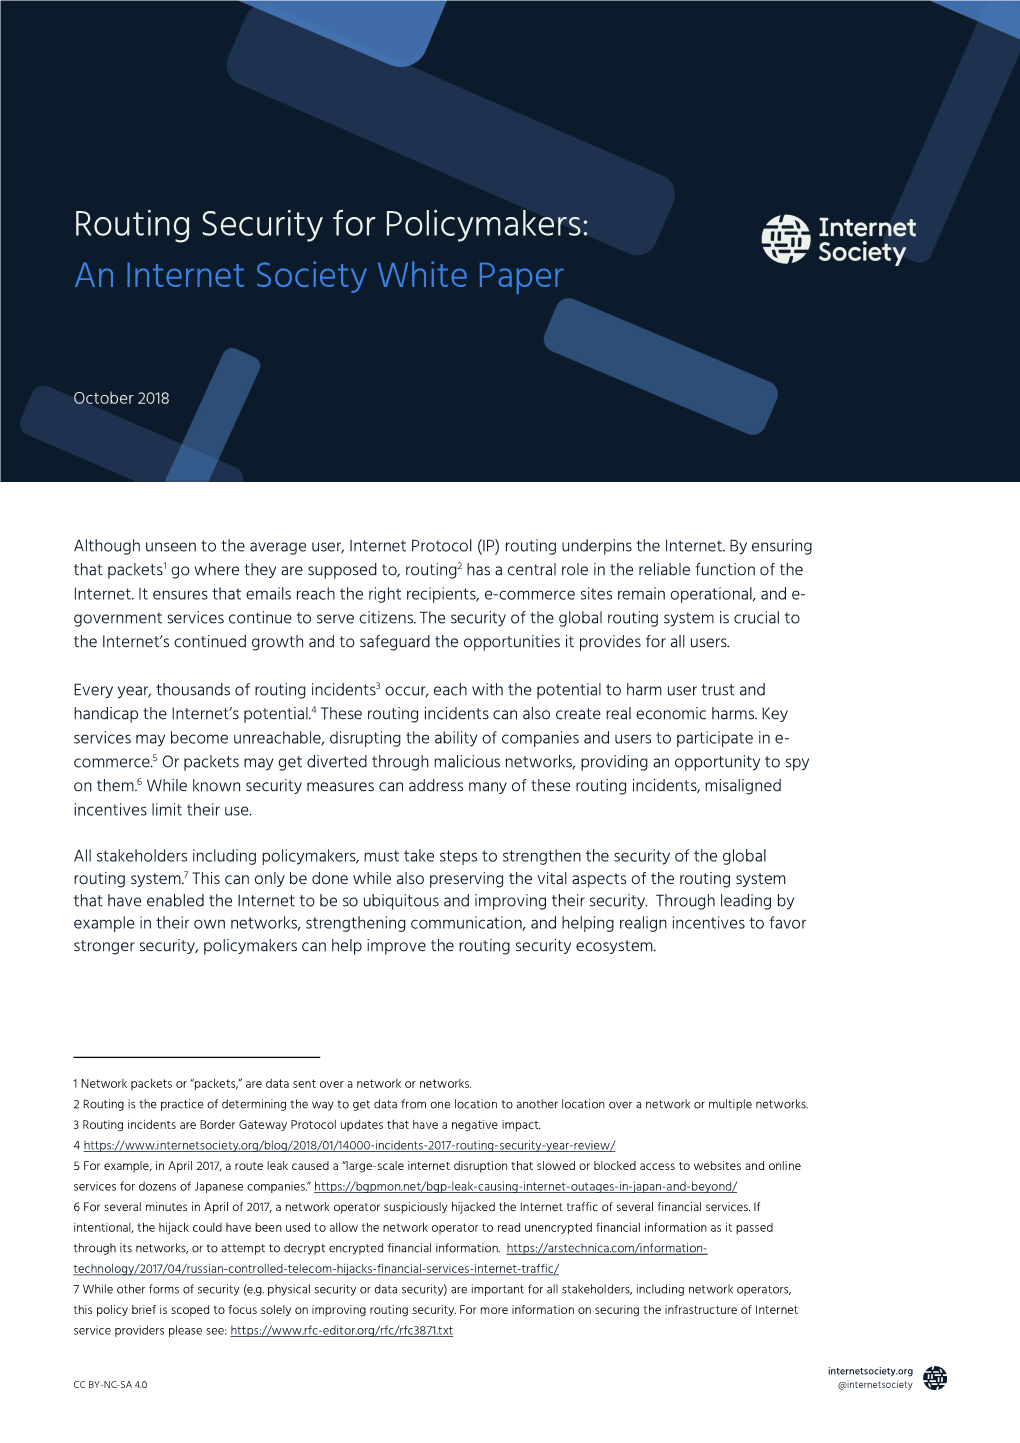 Routing Security for Policymakers: an Internet Society White Paper